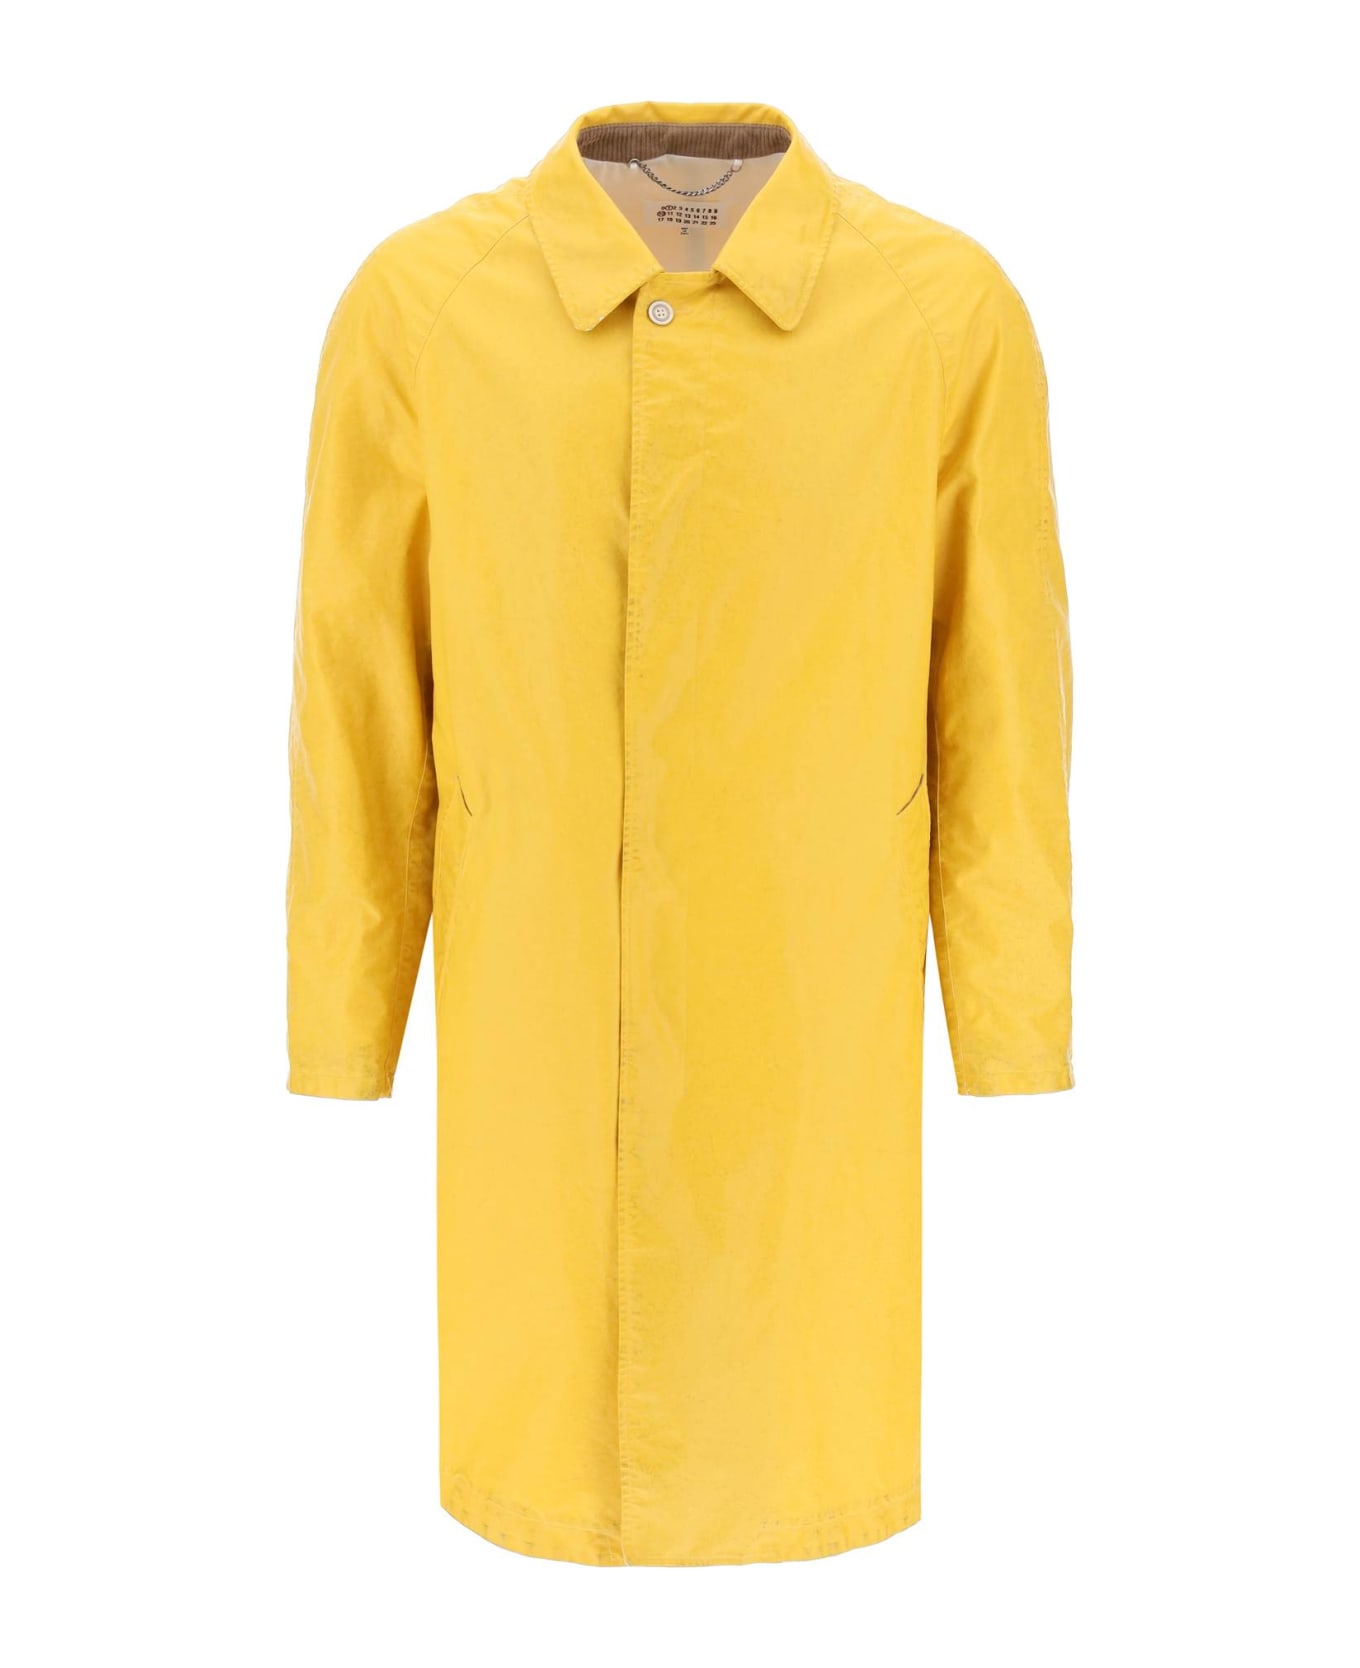 Maison Margiela Trench Coat In Worn-out Effect Coated Cotton - YELLOW (Yellow)